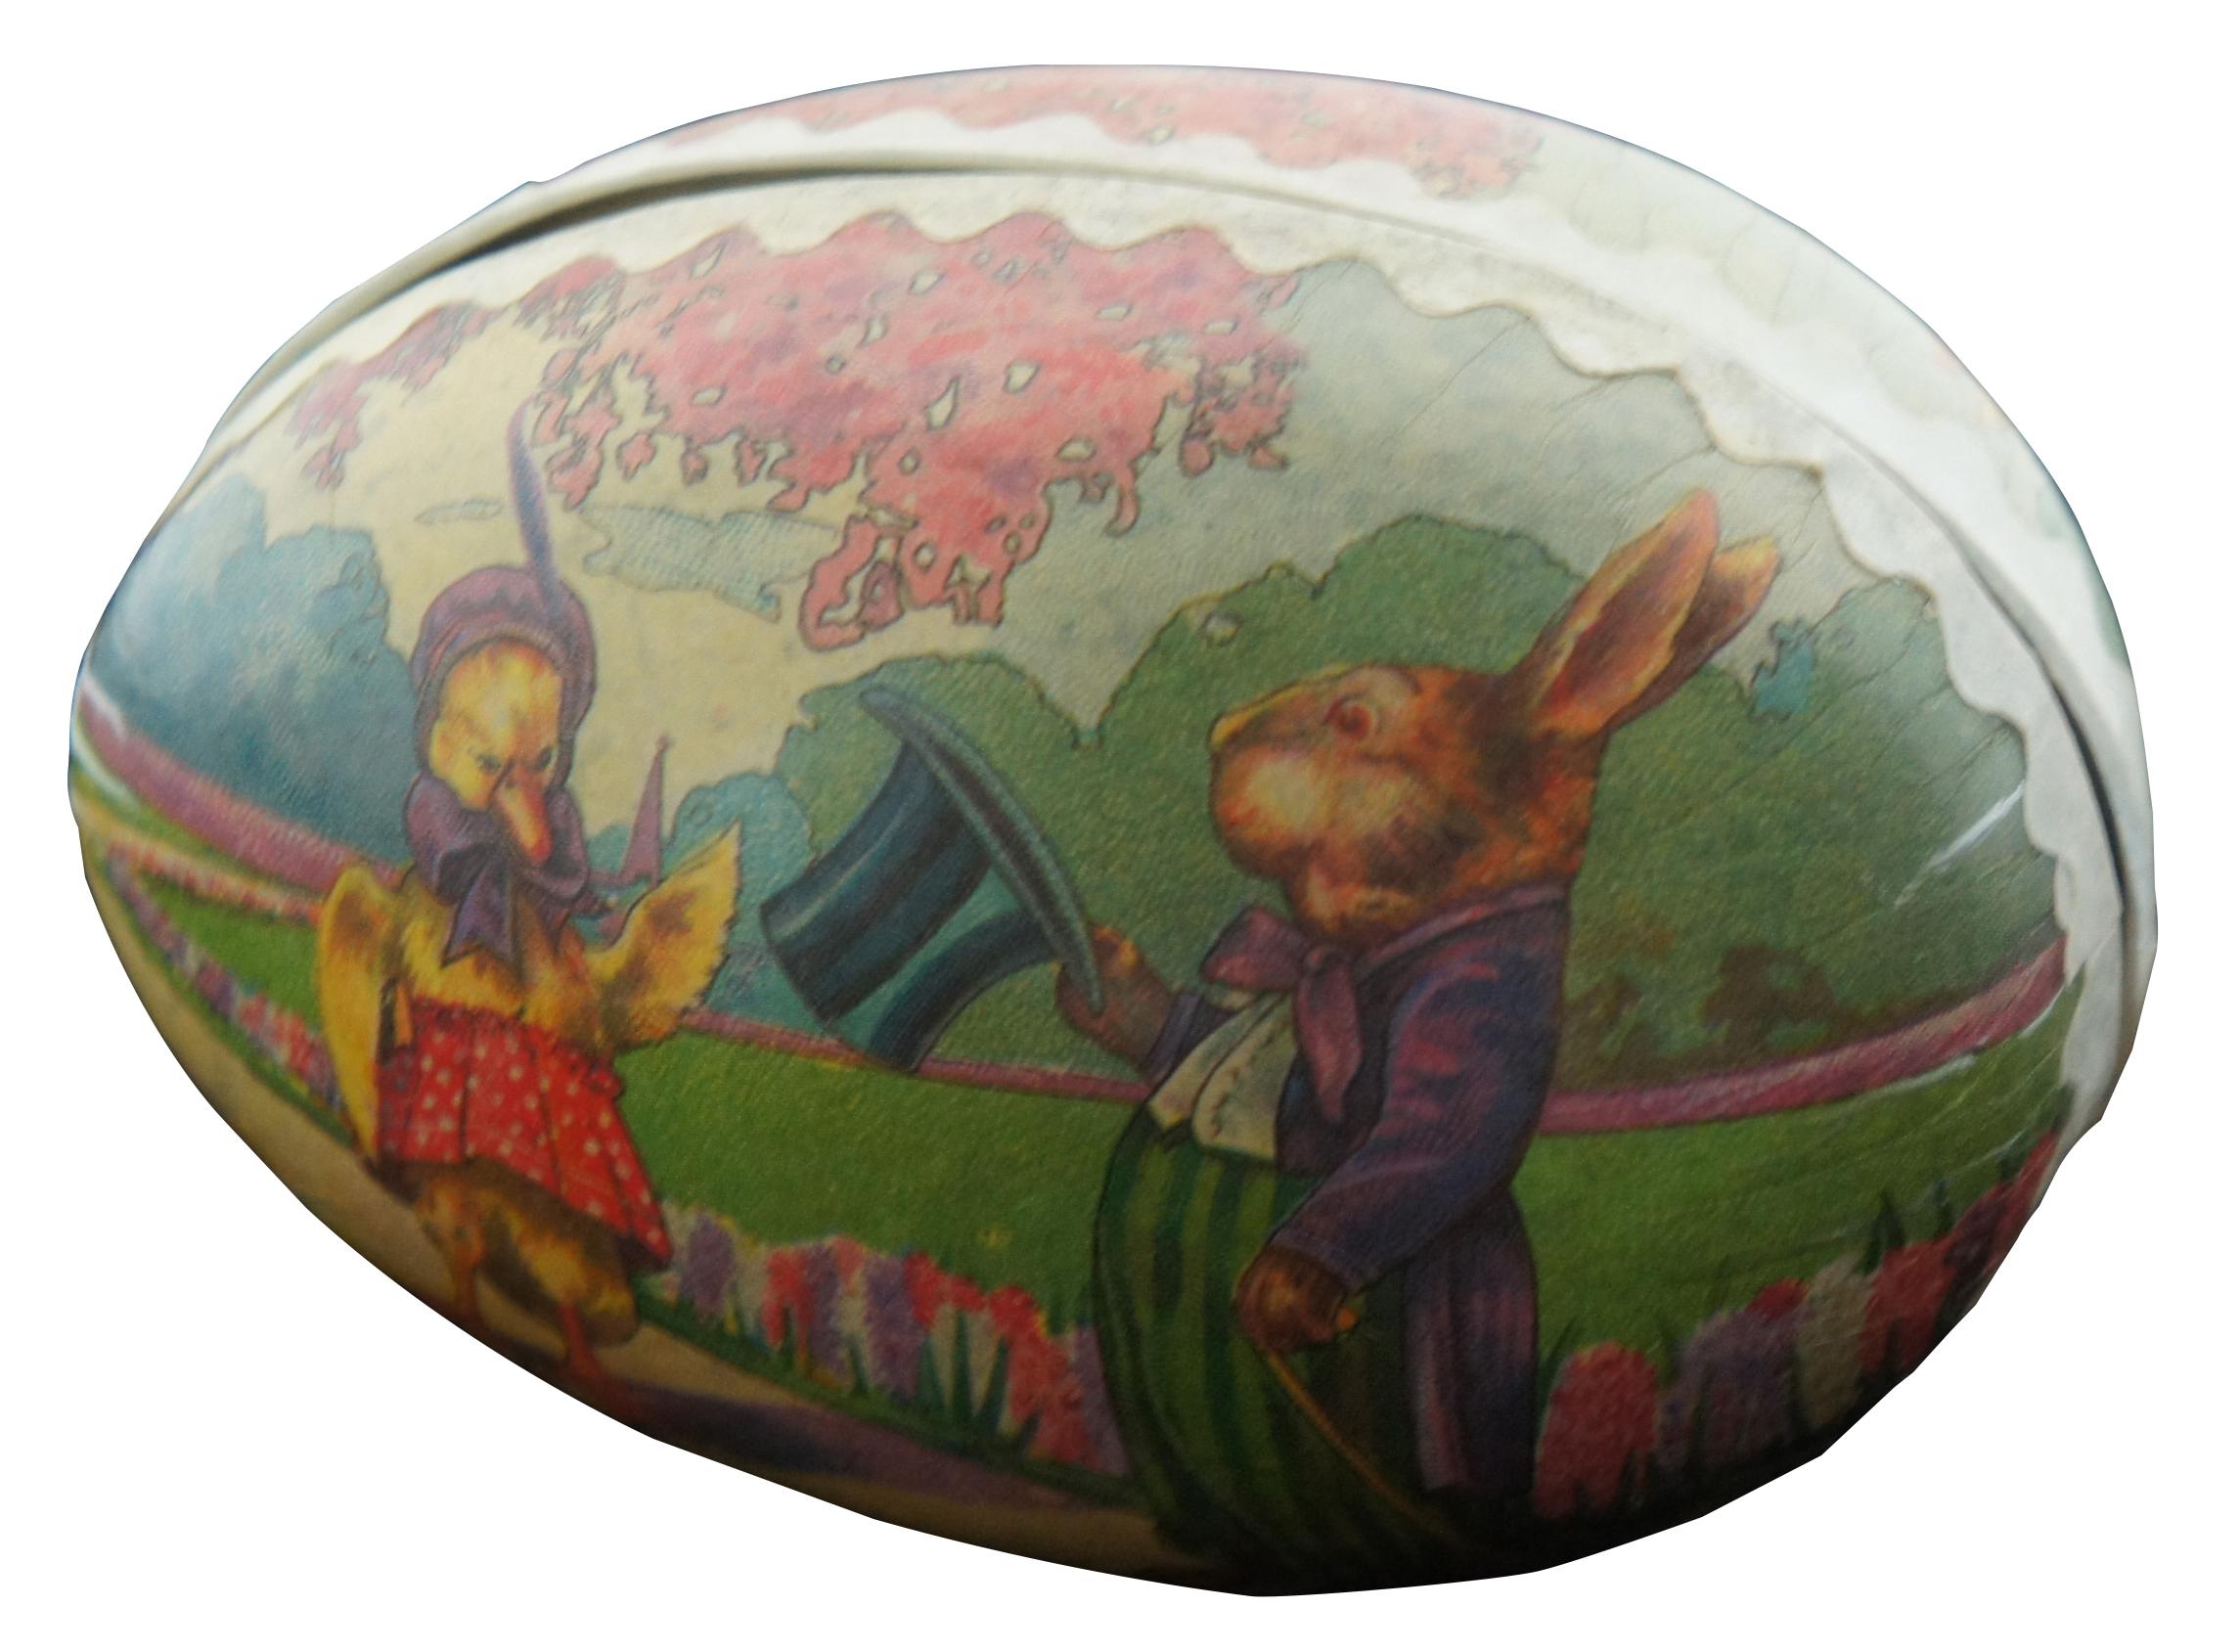 Antique German papier mâché Easter egg candy container, featuring a lithograph scene showing an anthropomorphized duck rejecting the advances of a well dressed rabbit in the park. Measure: 3.5